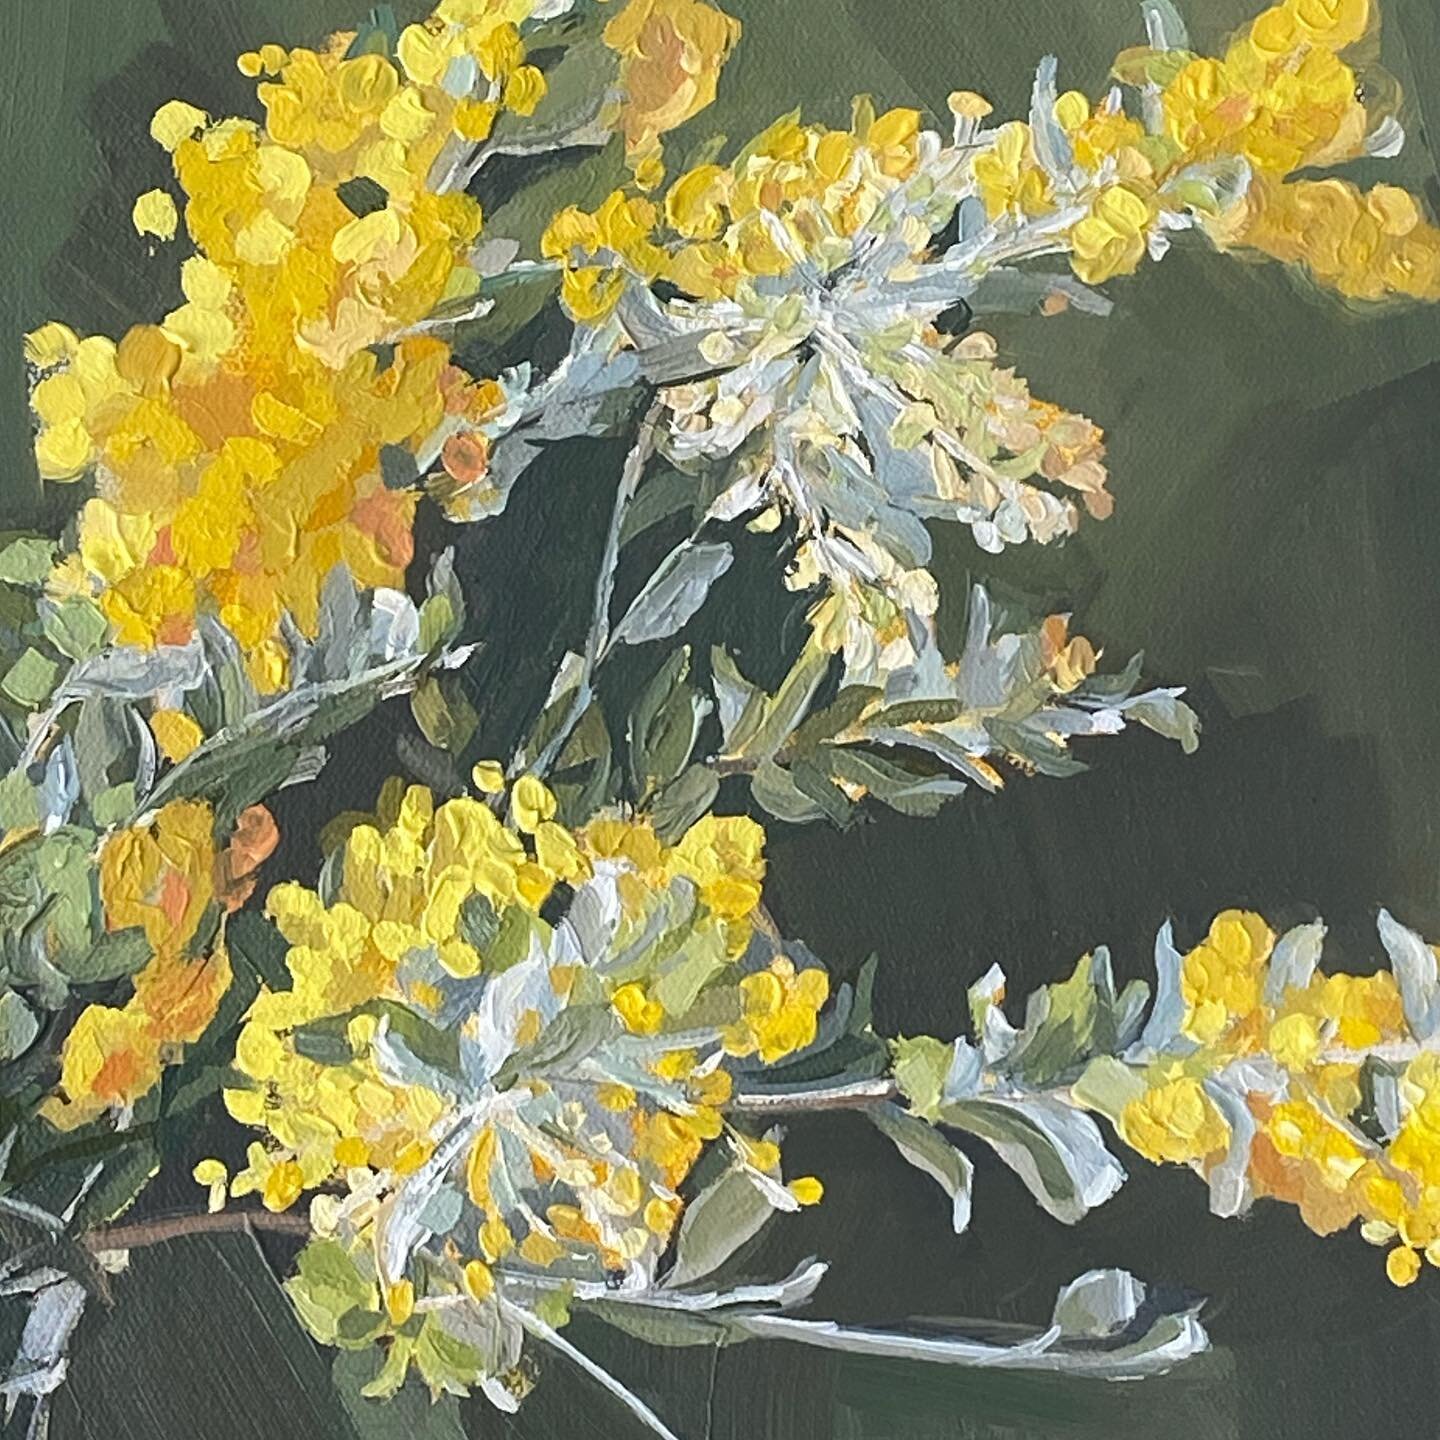 Dropping by to say 👋
I am painting slow paintings as time permits this year. This is a small section of a recent work. I lost track of how many daubs and dashes there are. Decided to mix plenty of greens and yellows to make things even trickier 😀

